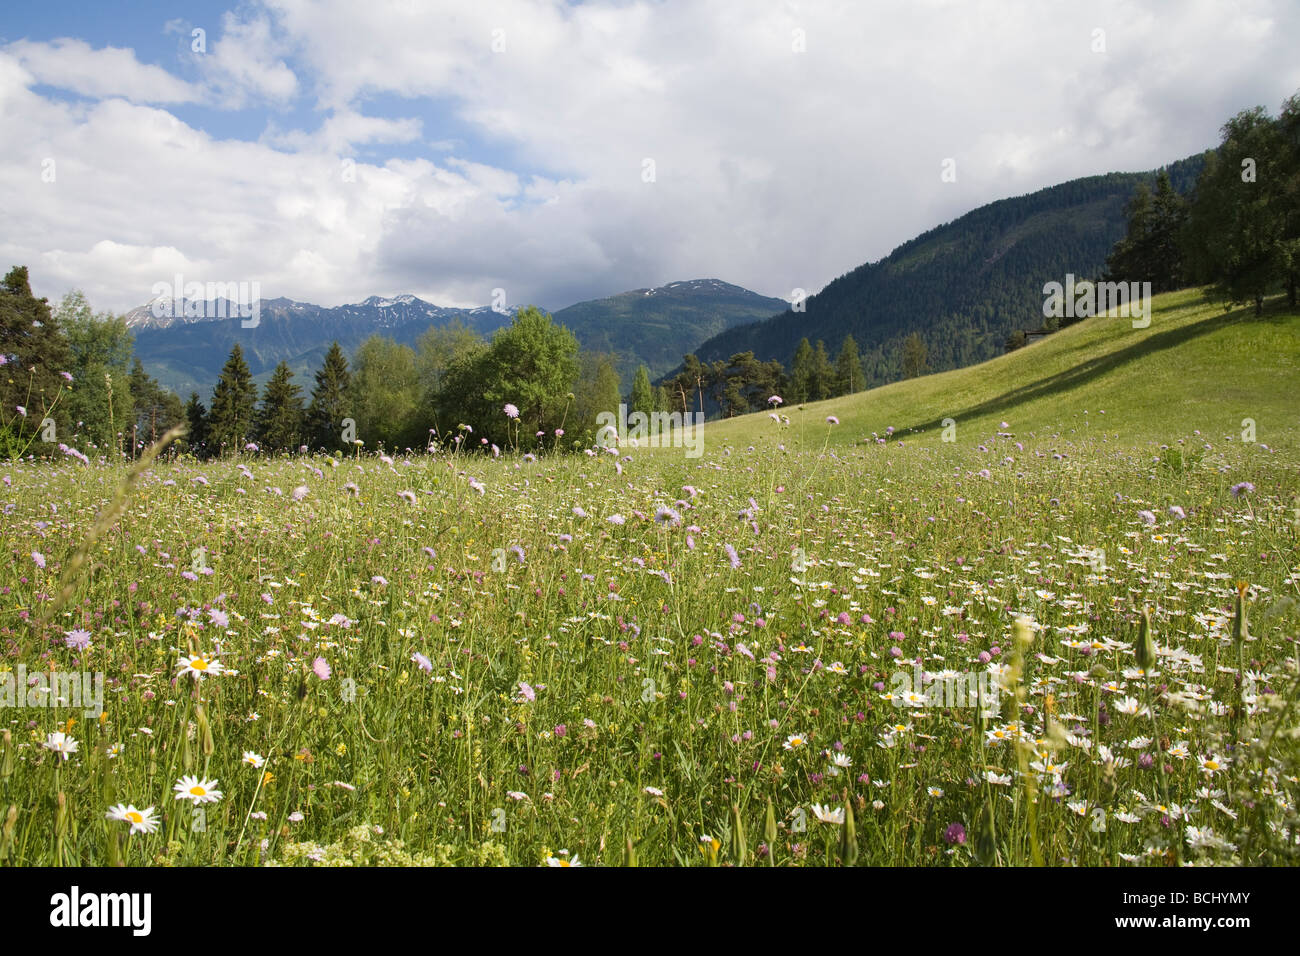 Tirol Austria EU An untouched alpine spring flower meadow of scabious clover grasses and ox eye daisies Stock Photo